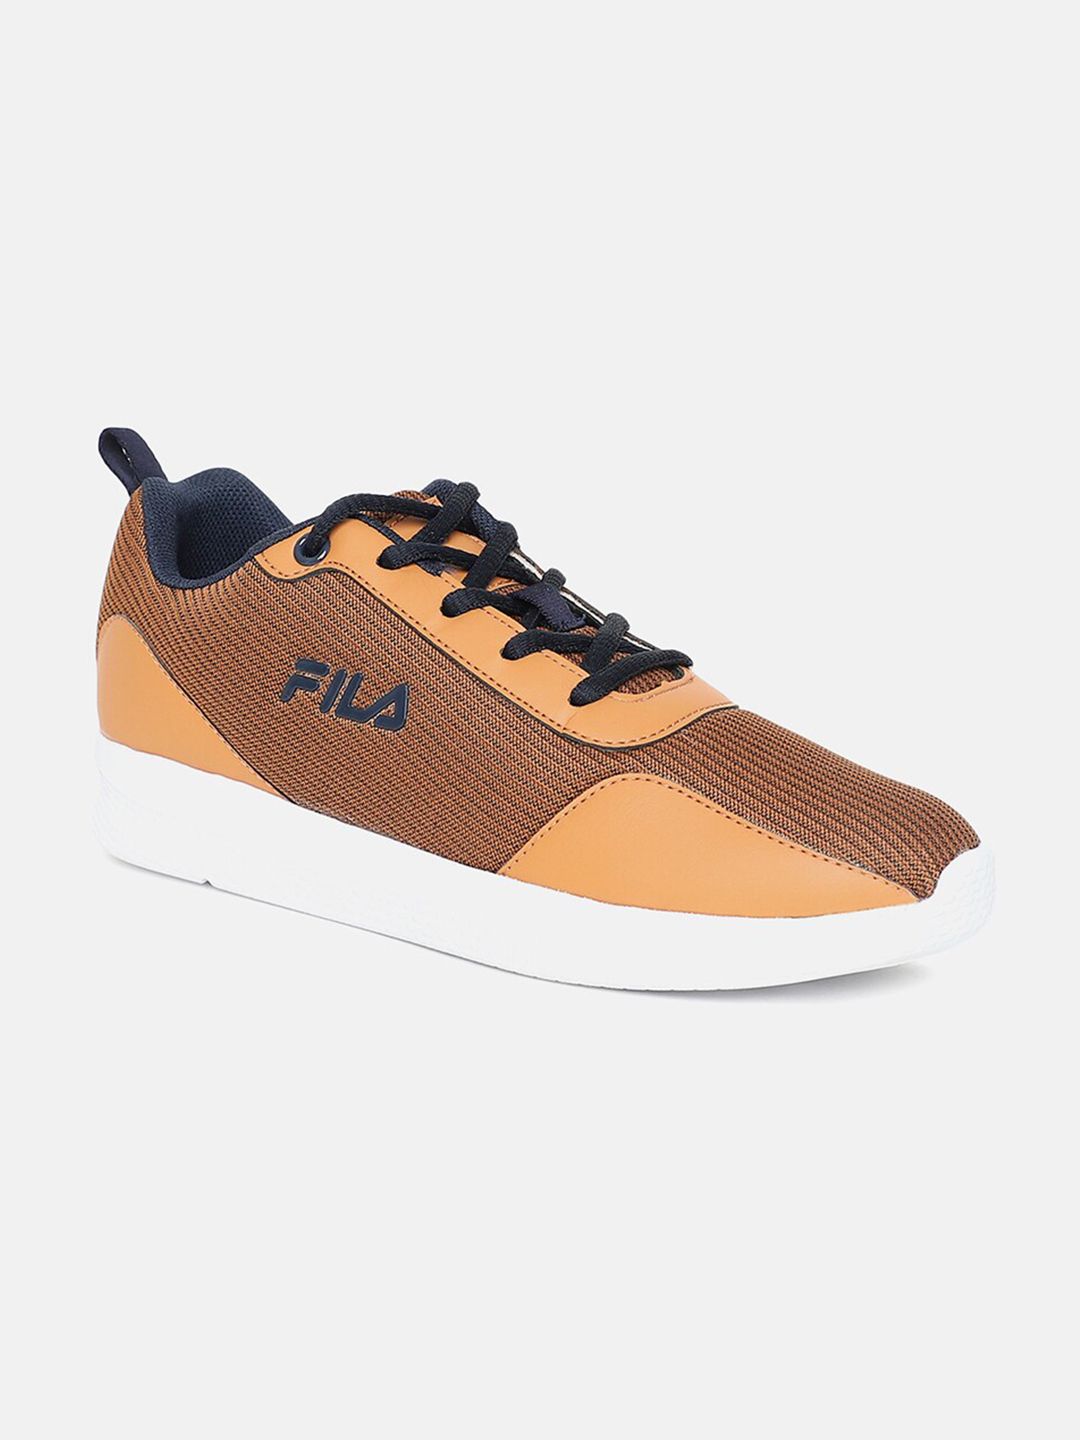 FILA Women Peach-Coloured REMIA Running Shoes Price in India